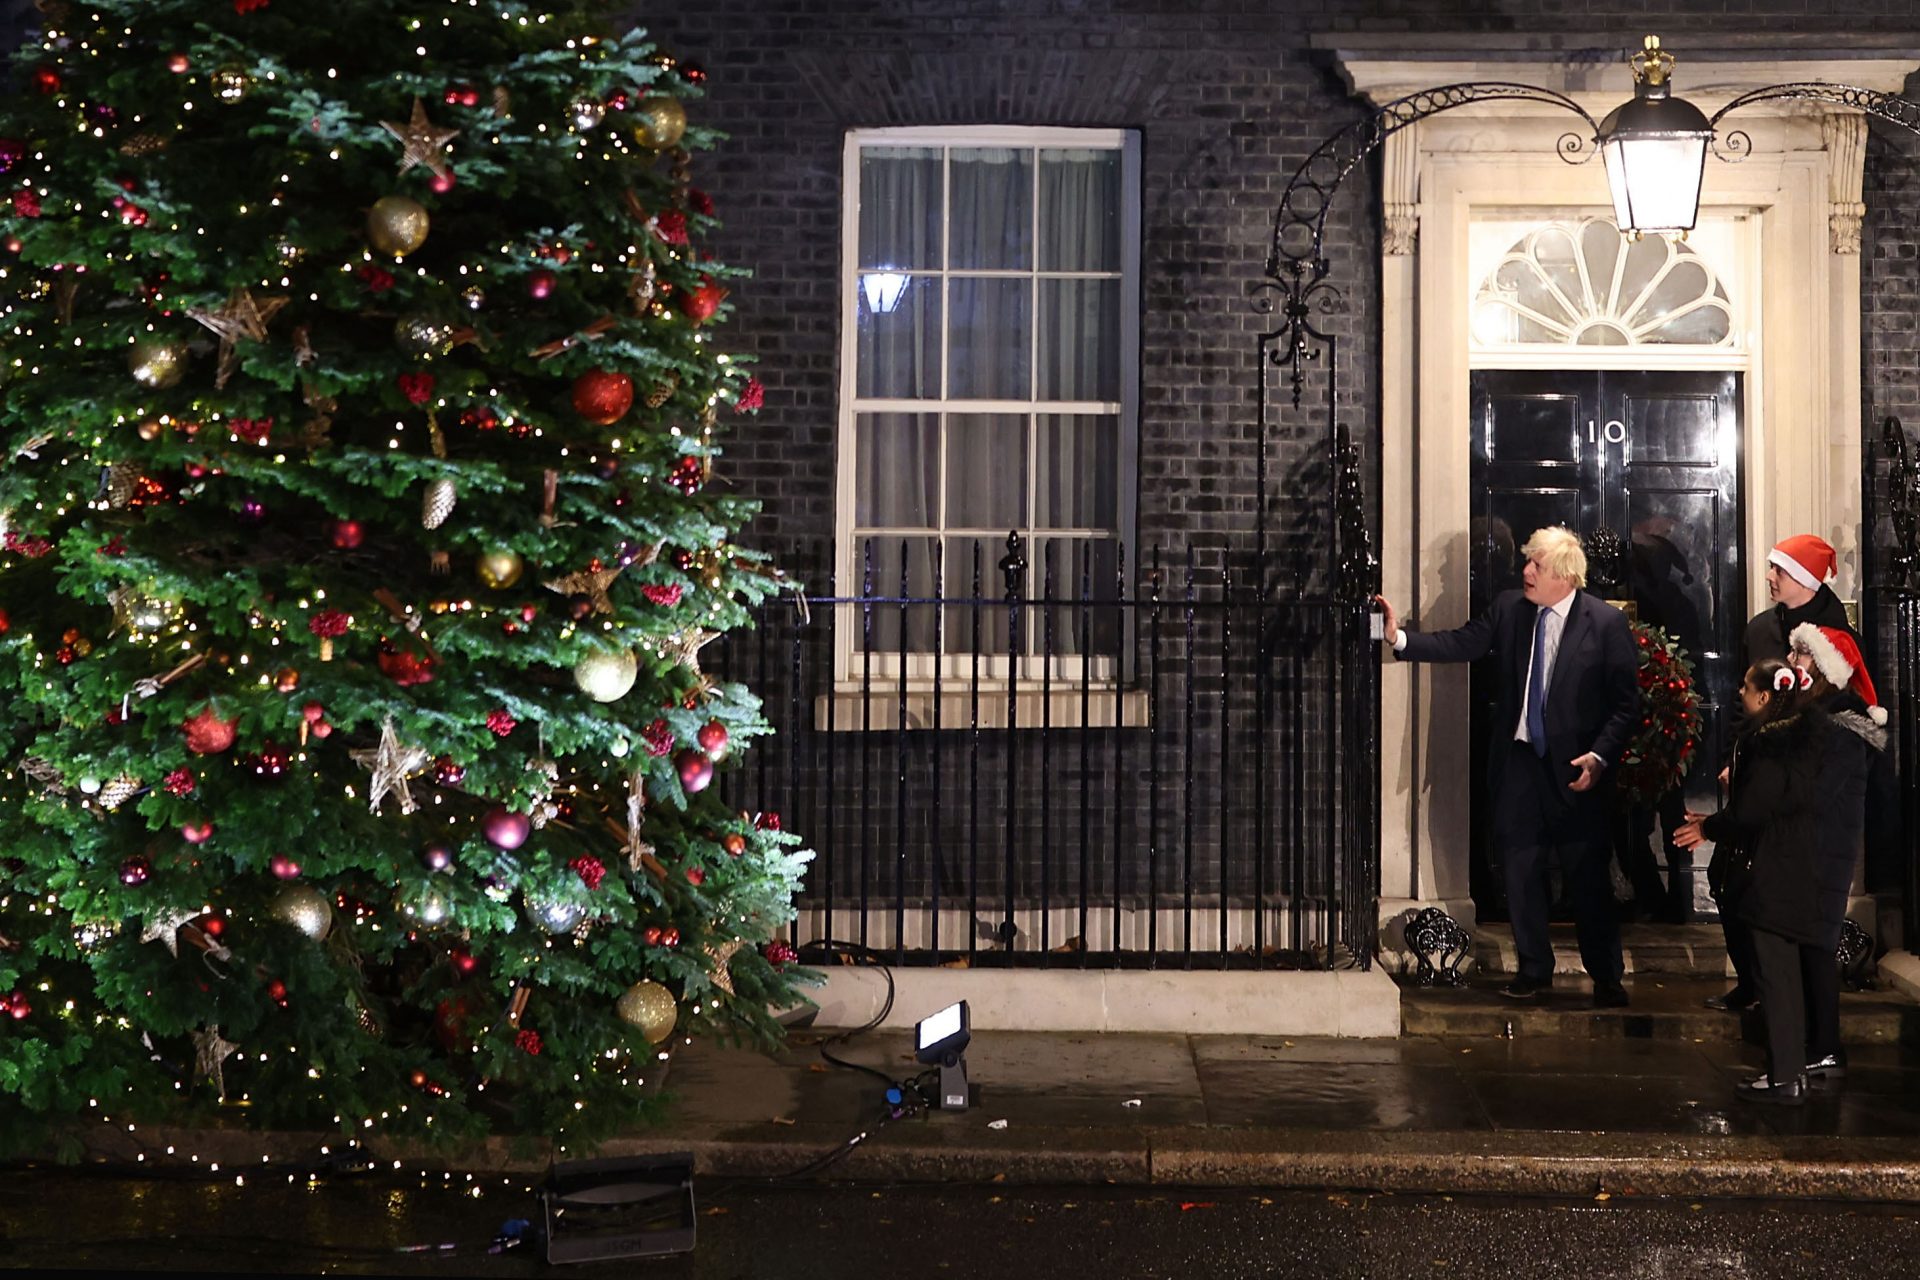 Boris Johnson hosts an event to light up the Christmas tree on Downing Street. Photo: Dan Kitwood/Getty Images.